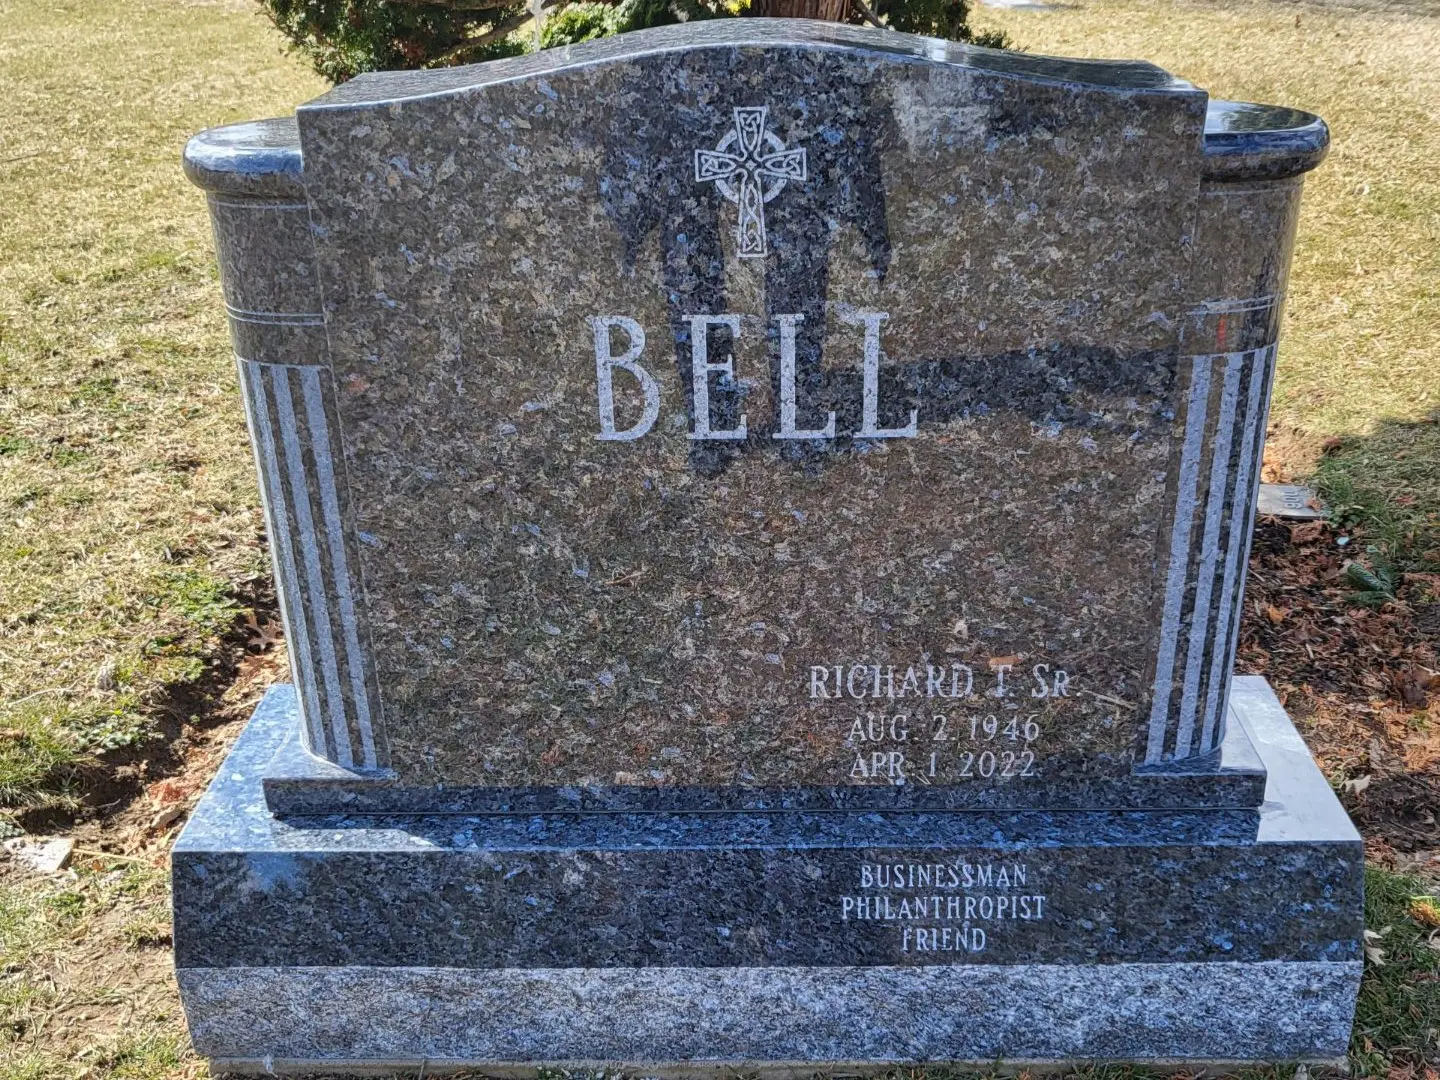 A grave marker for the name bell